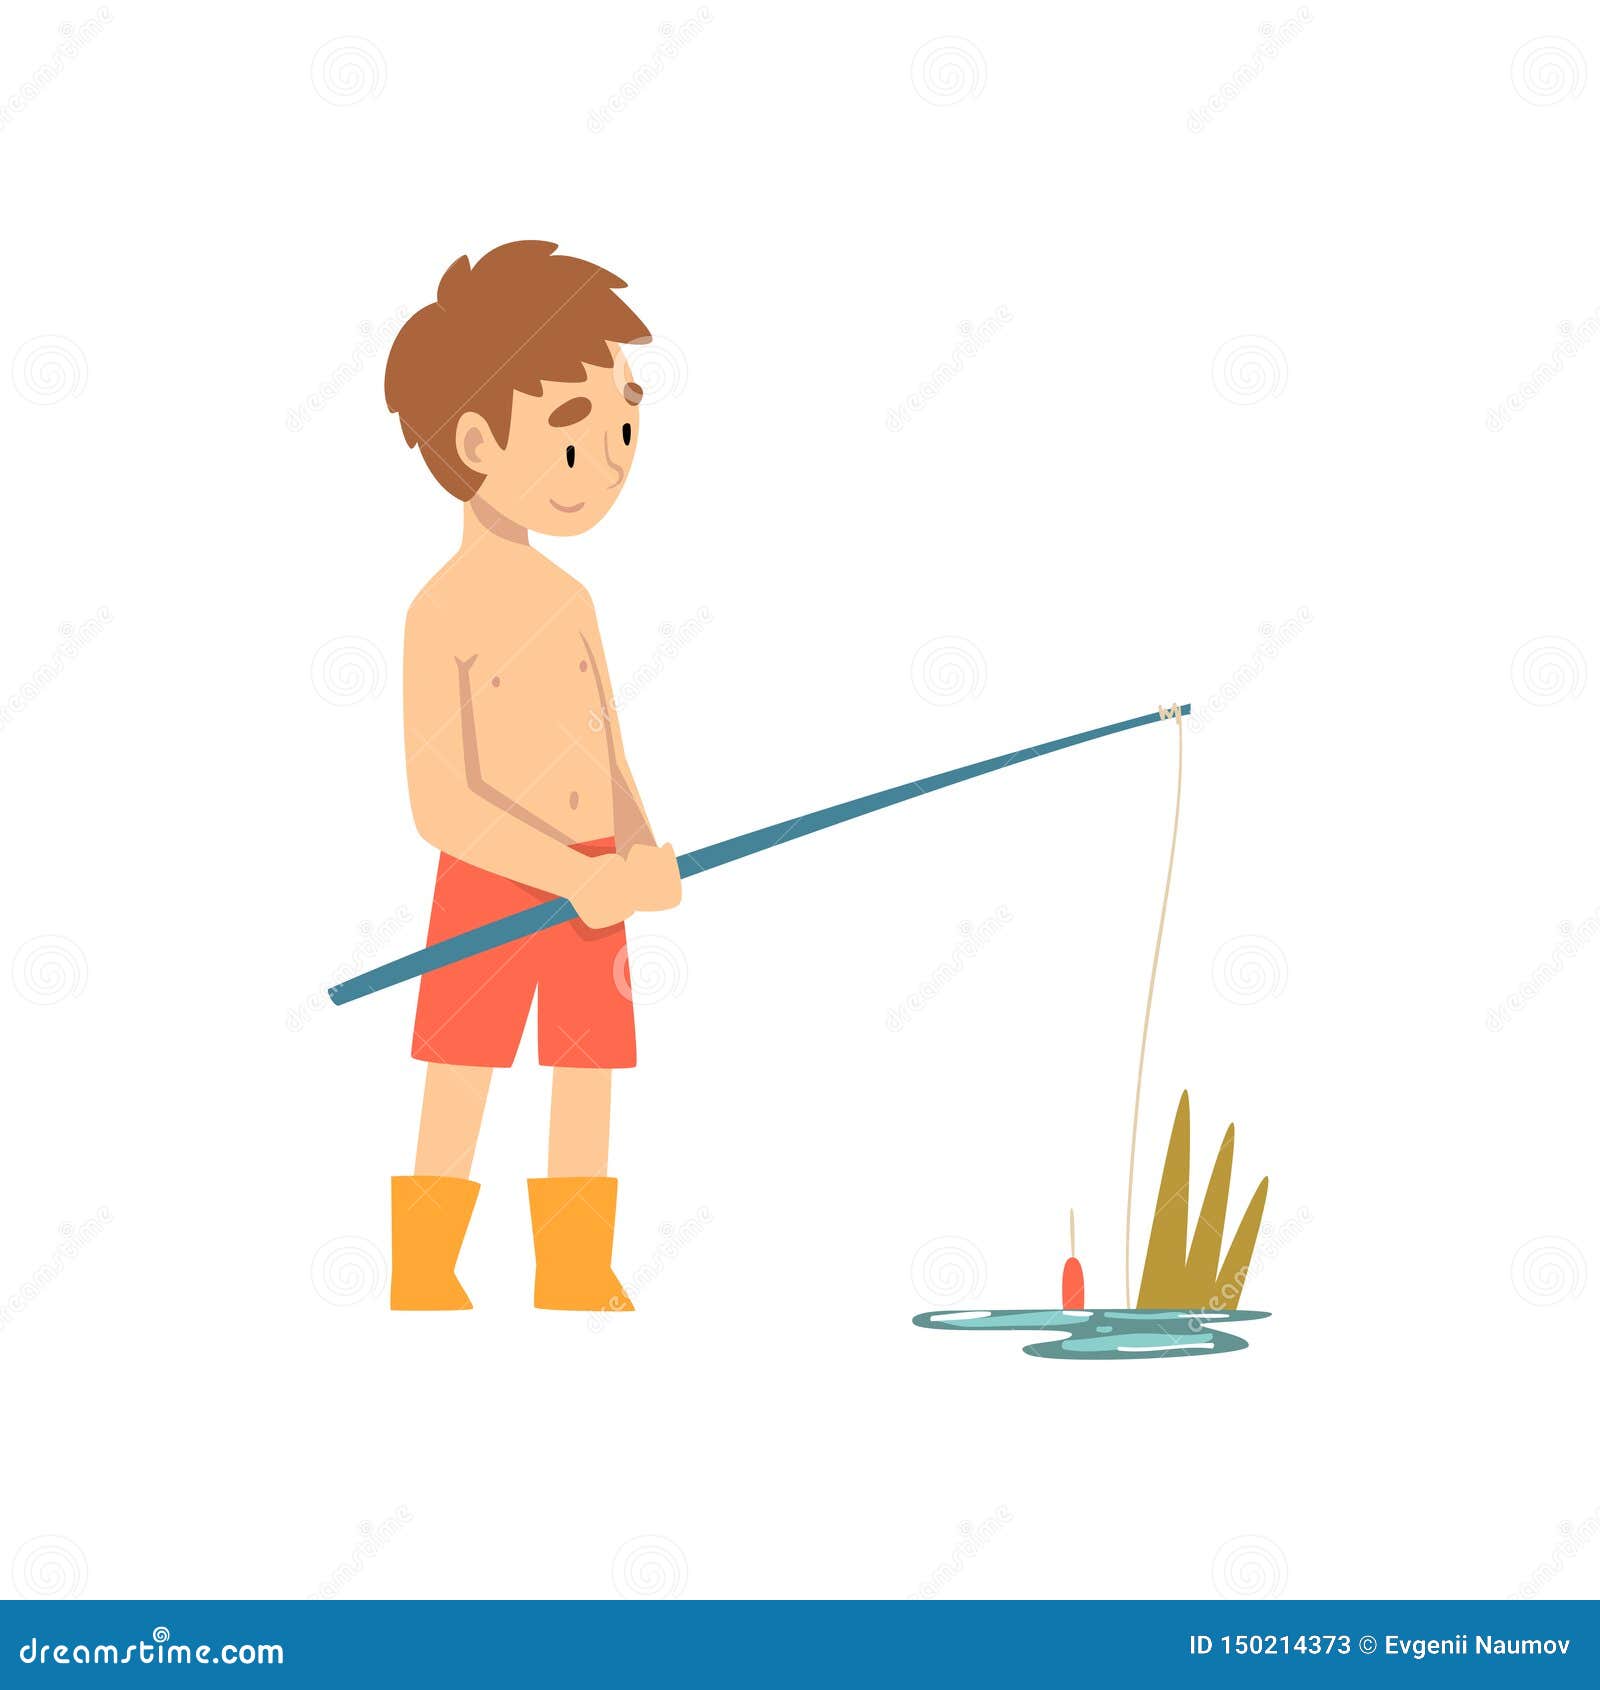 Download Cute Boy Fishing With Fishing Rod, Little Fisherman Cartoon Character Vector Illustration Stock ...